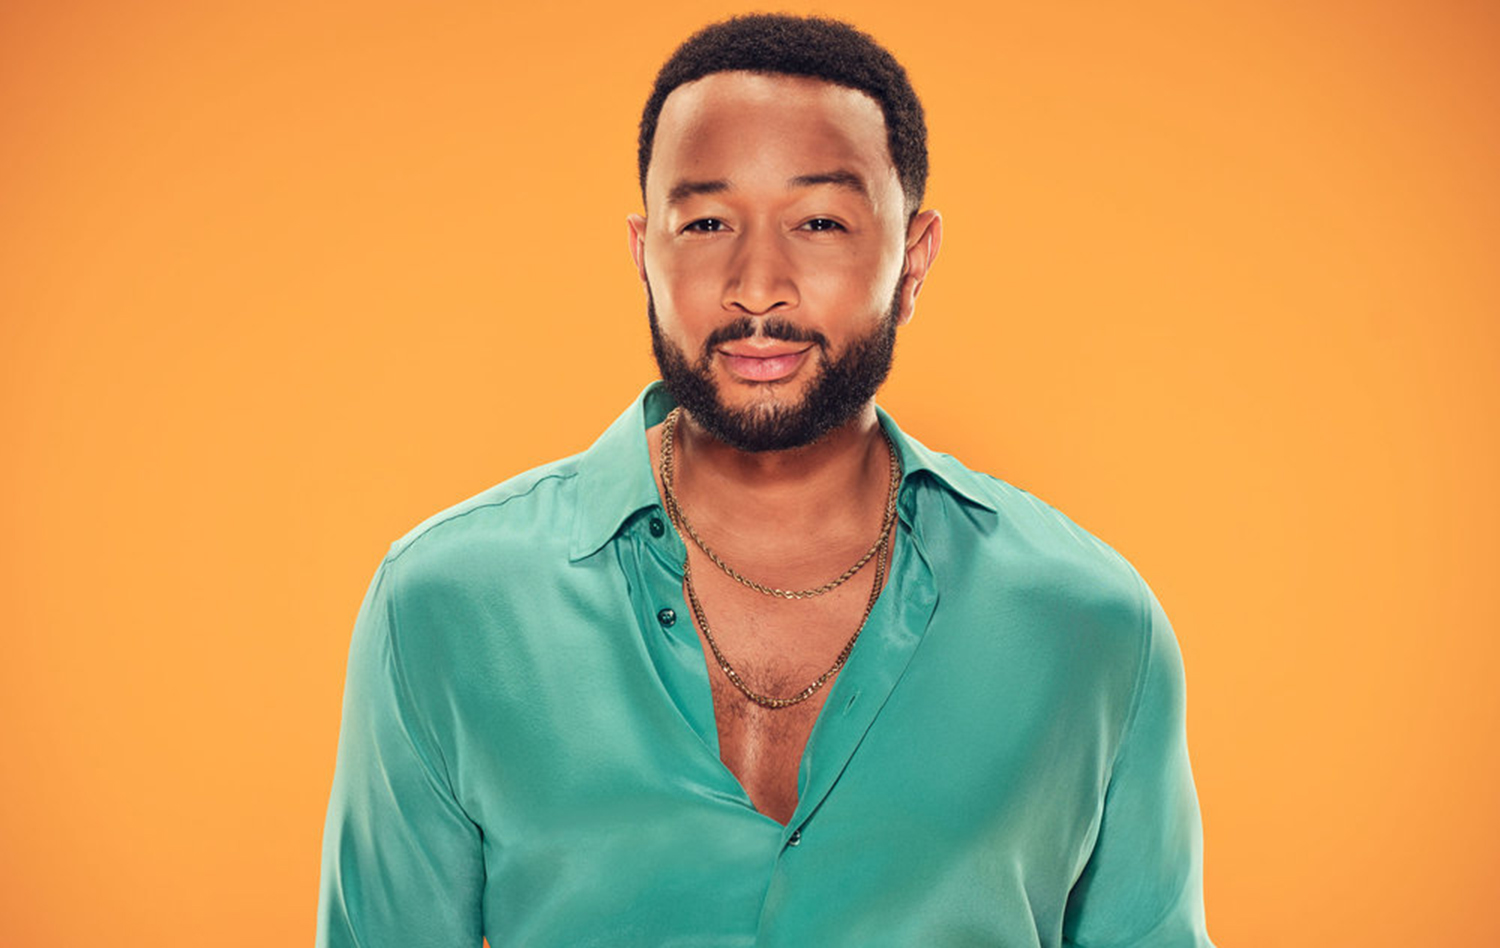 The Voice coach John Legend, who doesn't typically turn his chair for artists who sing his songs